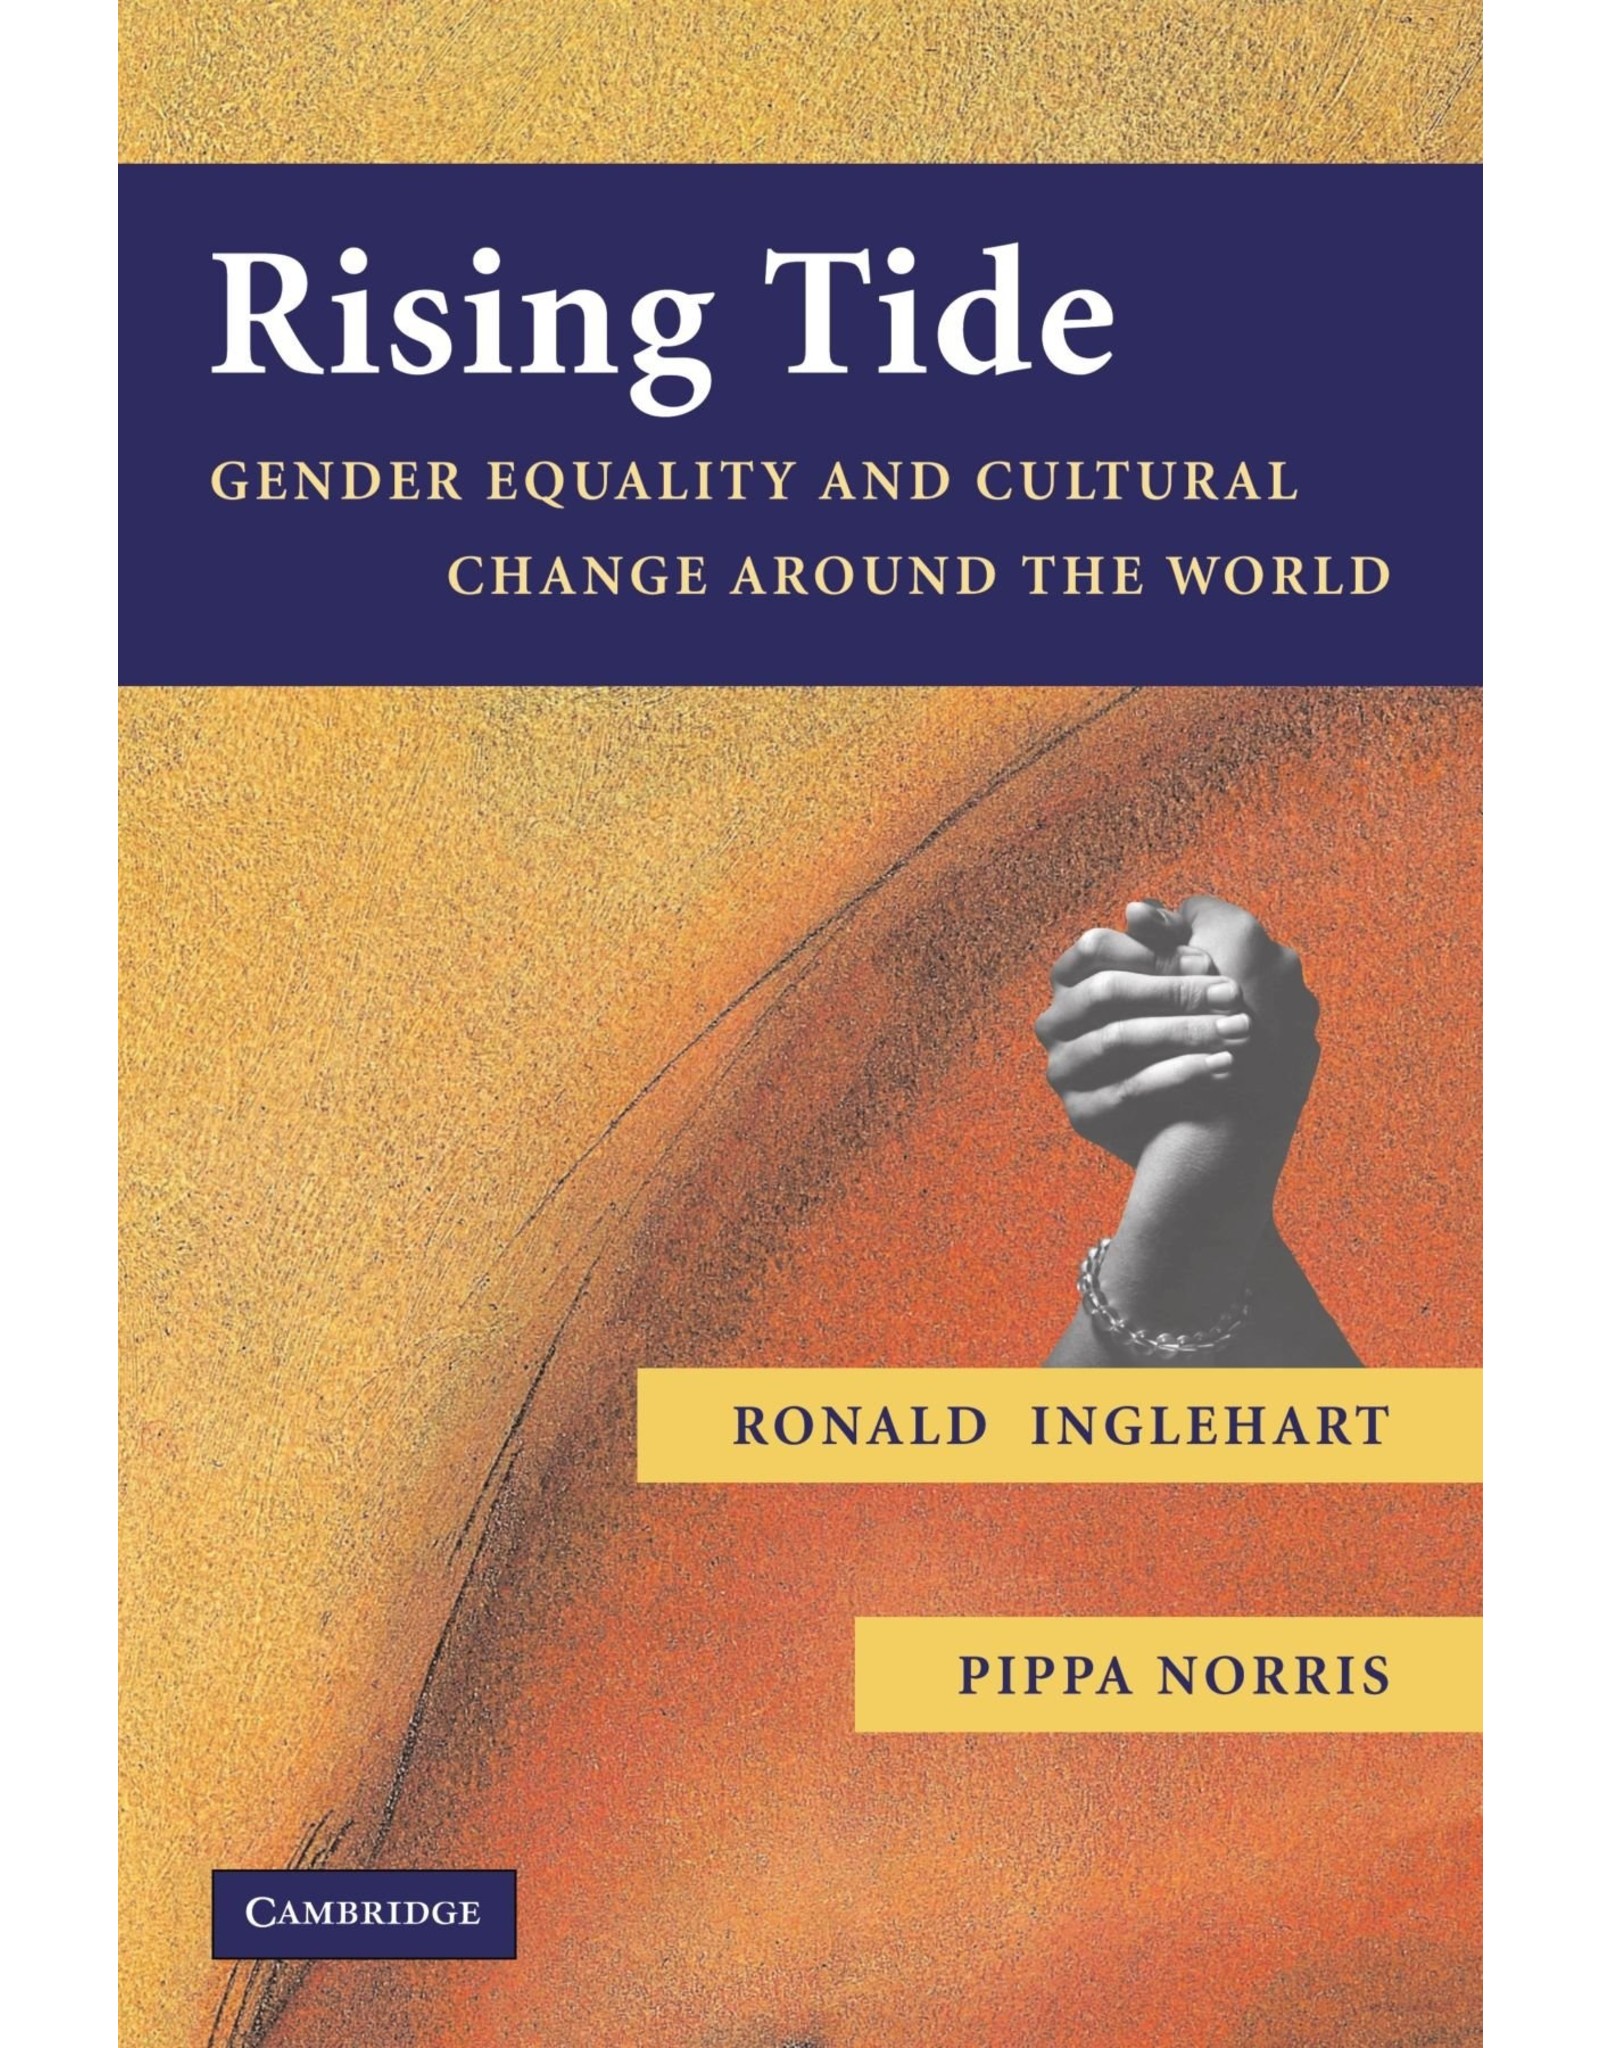 Literature Rising Tide: Gender Equality and Cultural Change Around the World